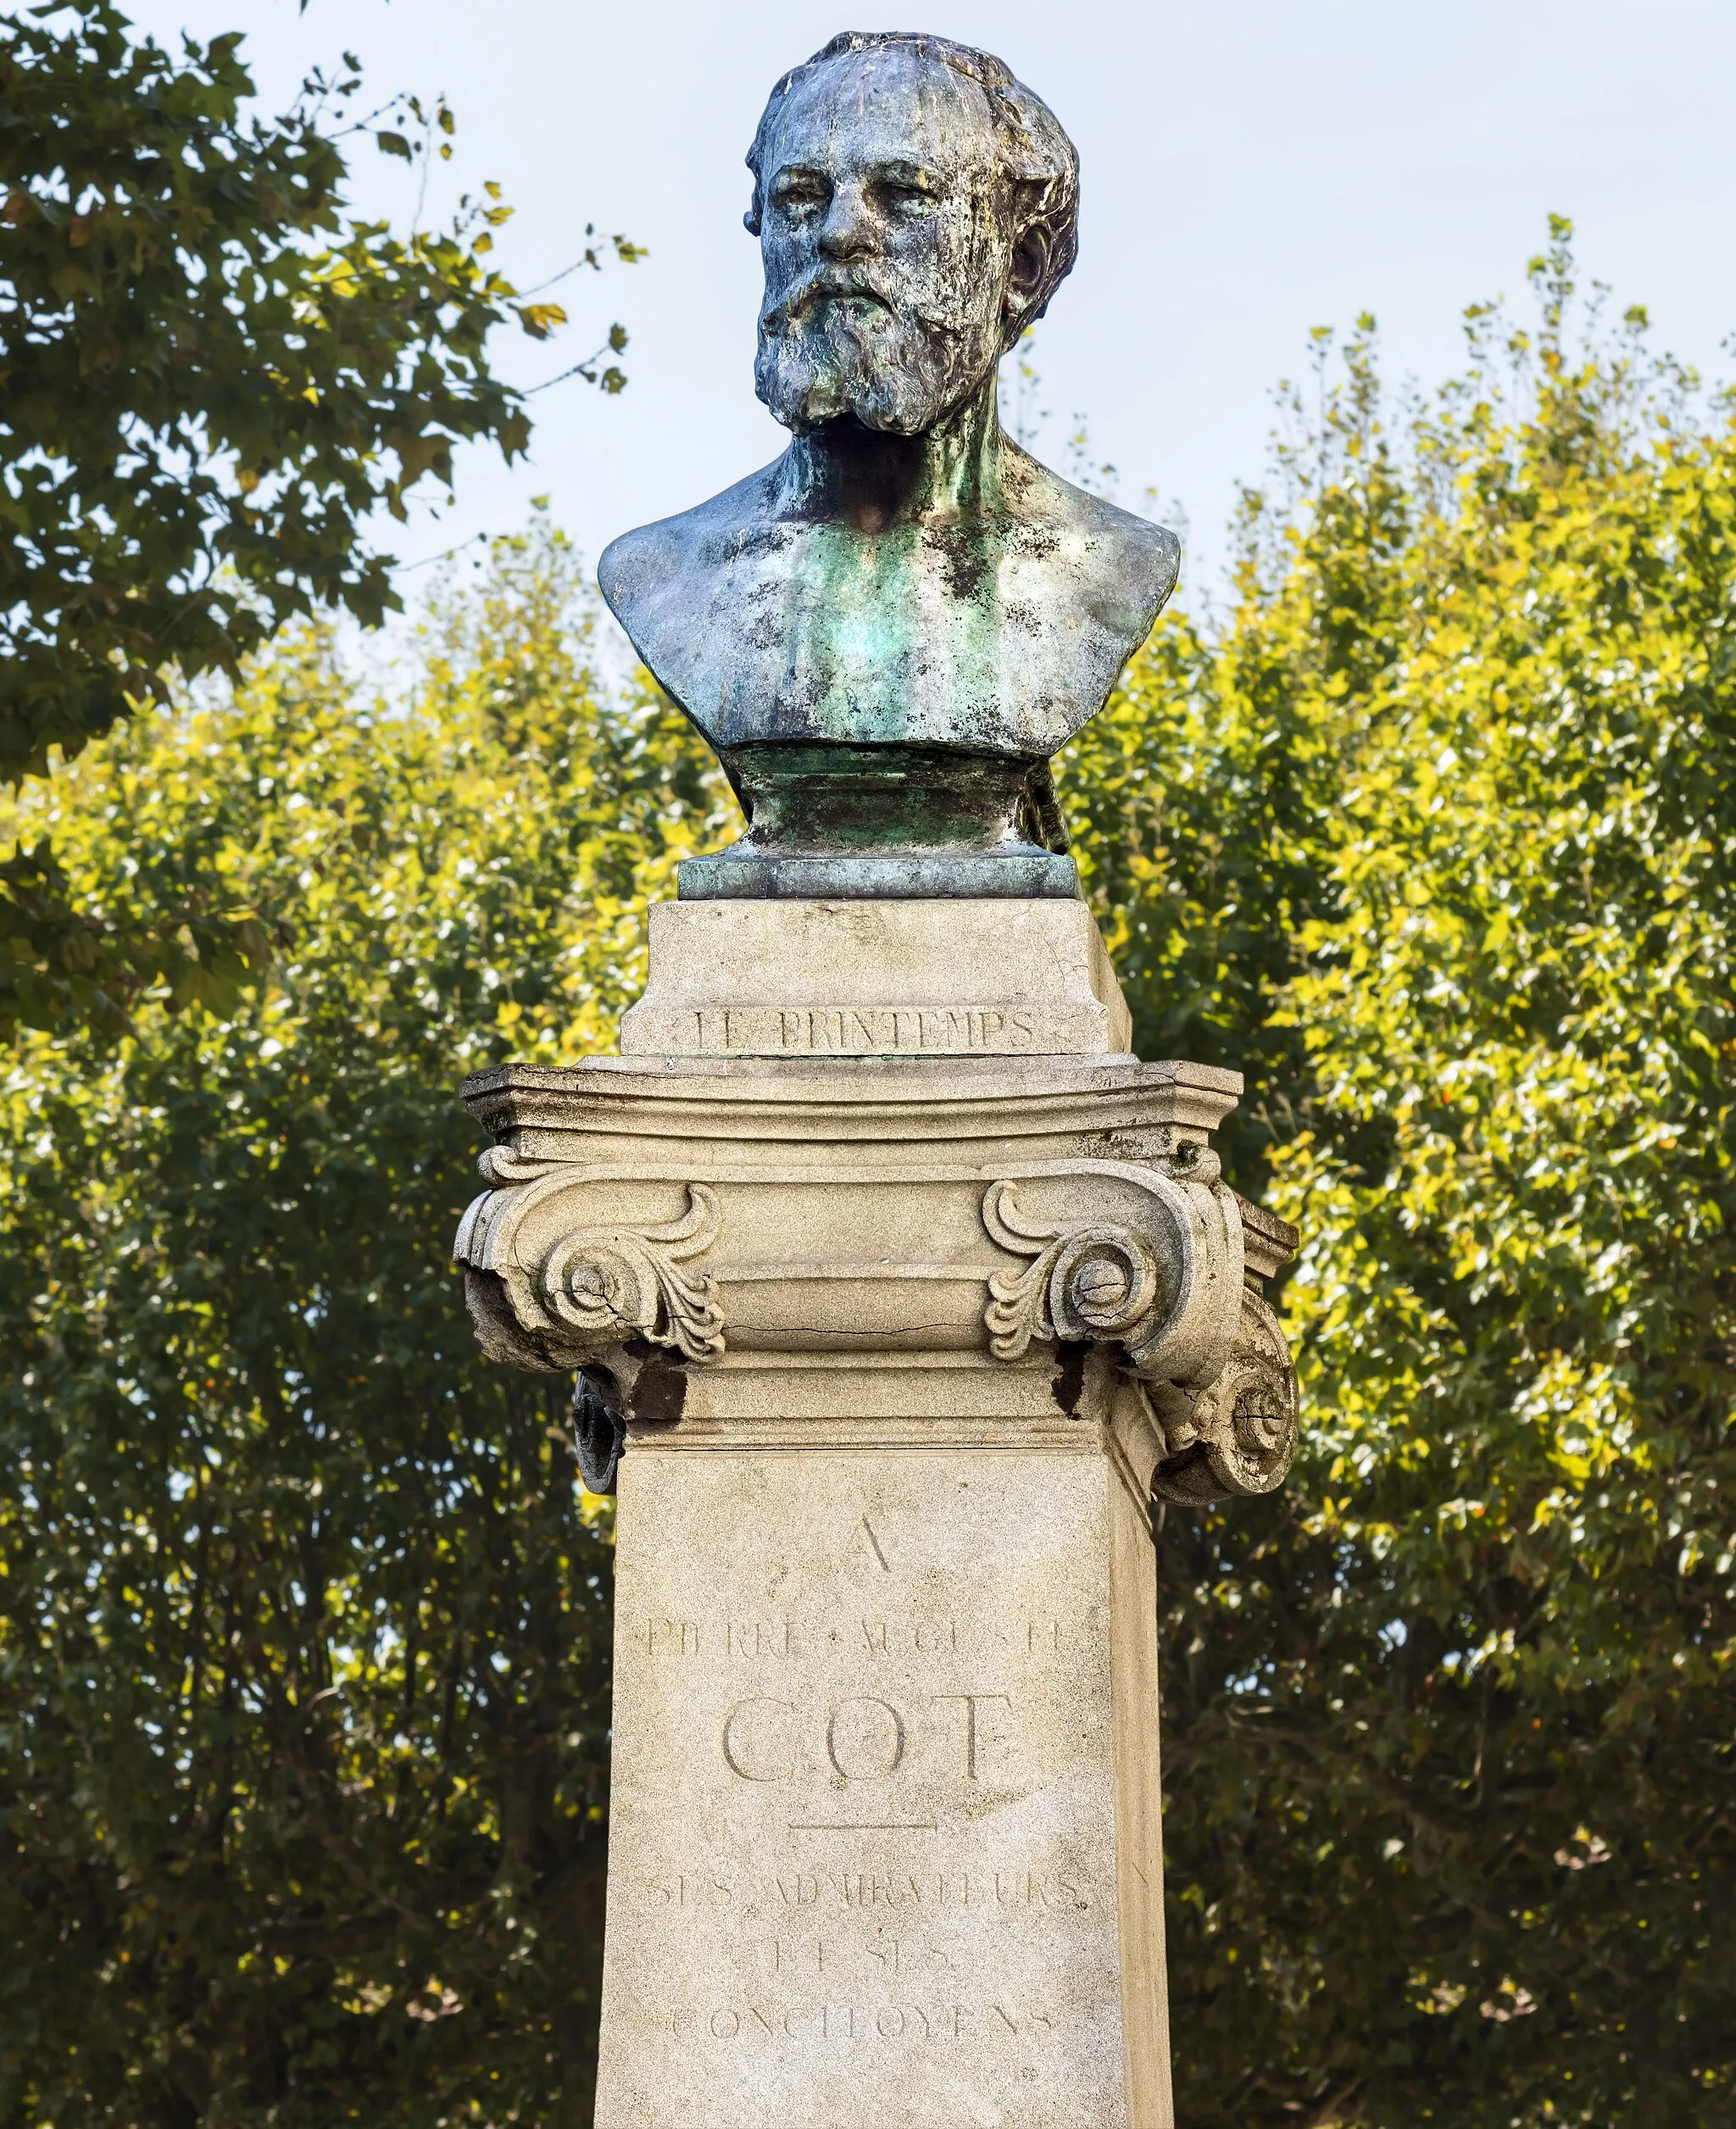 Photo showing: A bust of Cot at Pierre Auguste Cot Memorial, Bédarieux, France